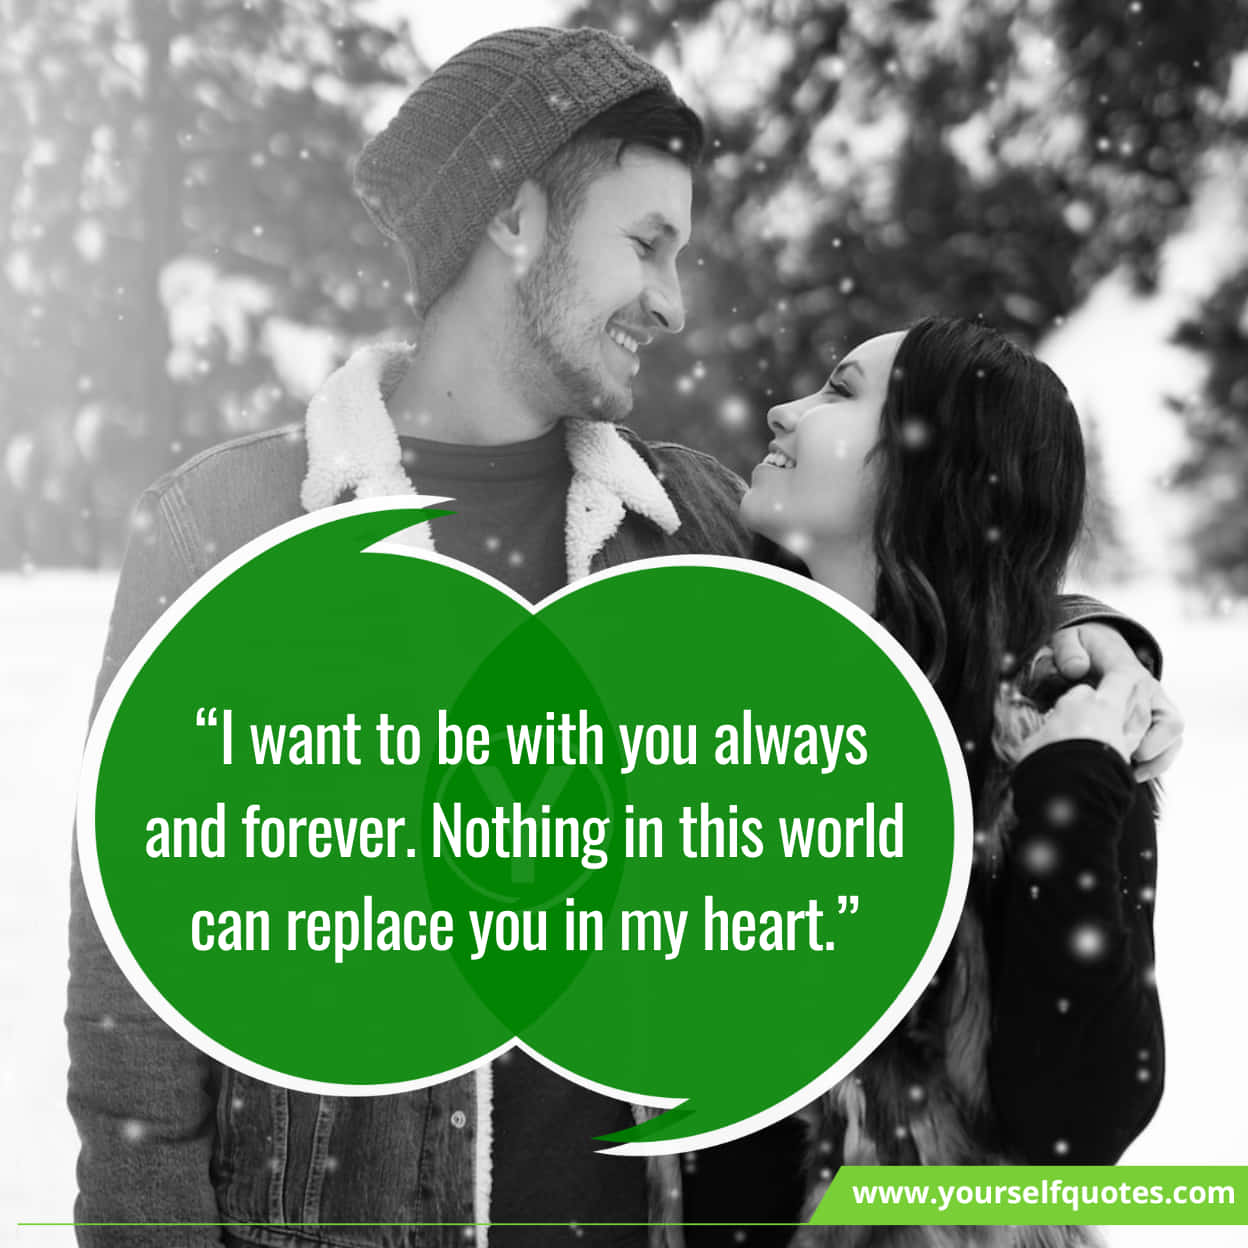 Beautiful Love Messages About Couples